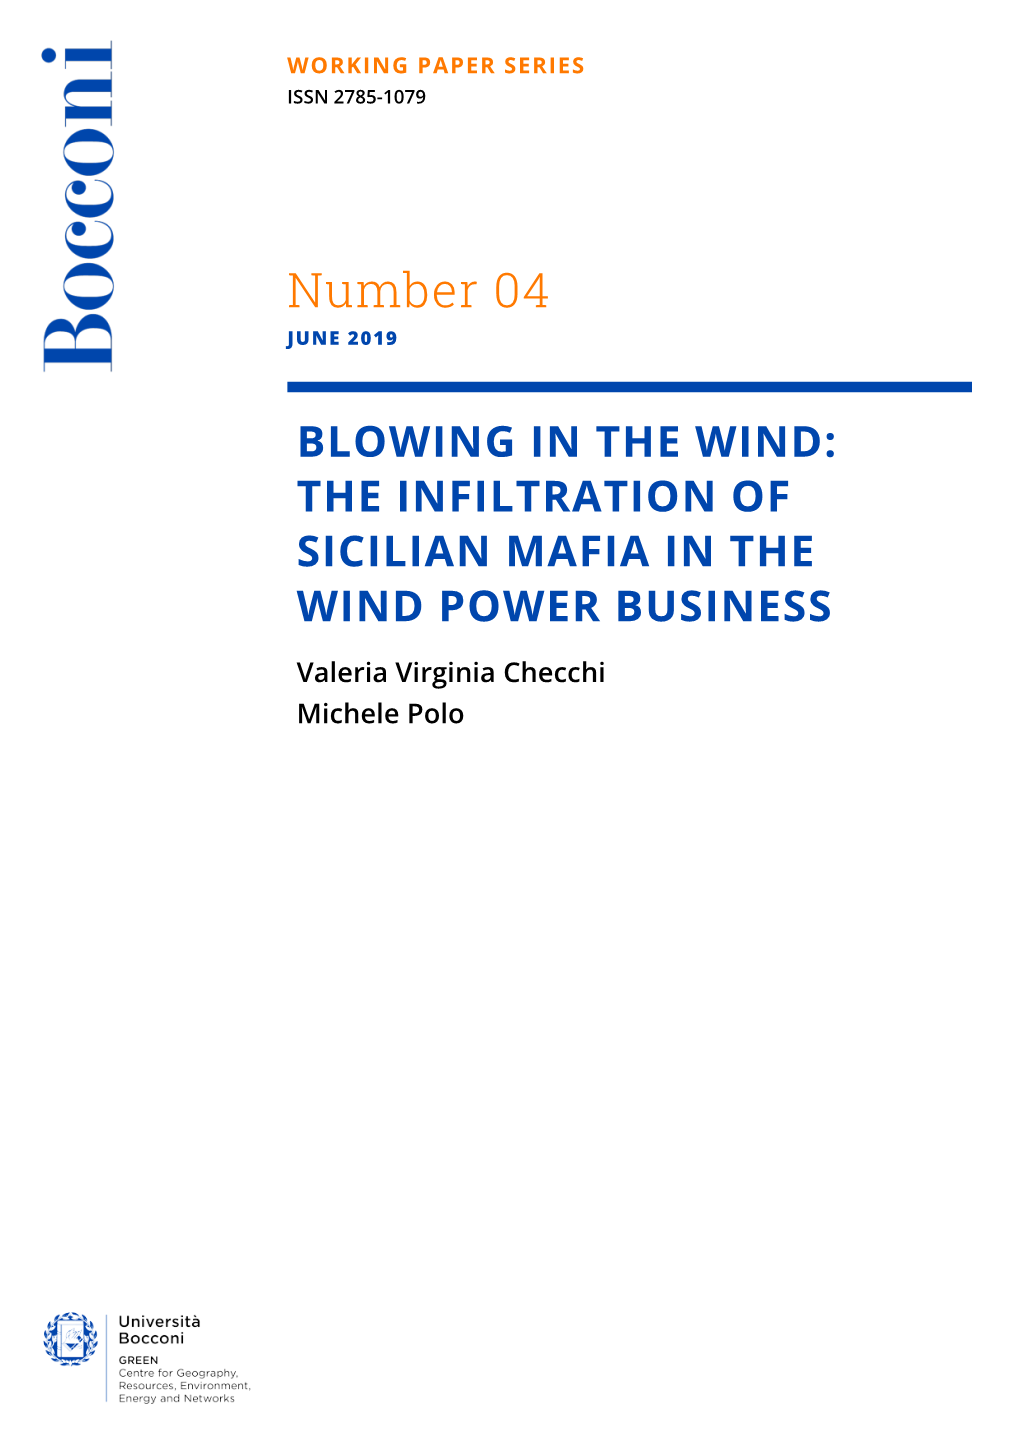 The Infiltration of Sicilian Mafia in the Wind Power Business